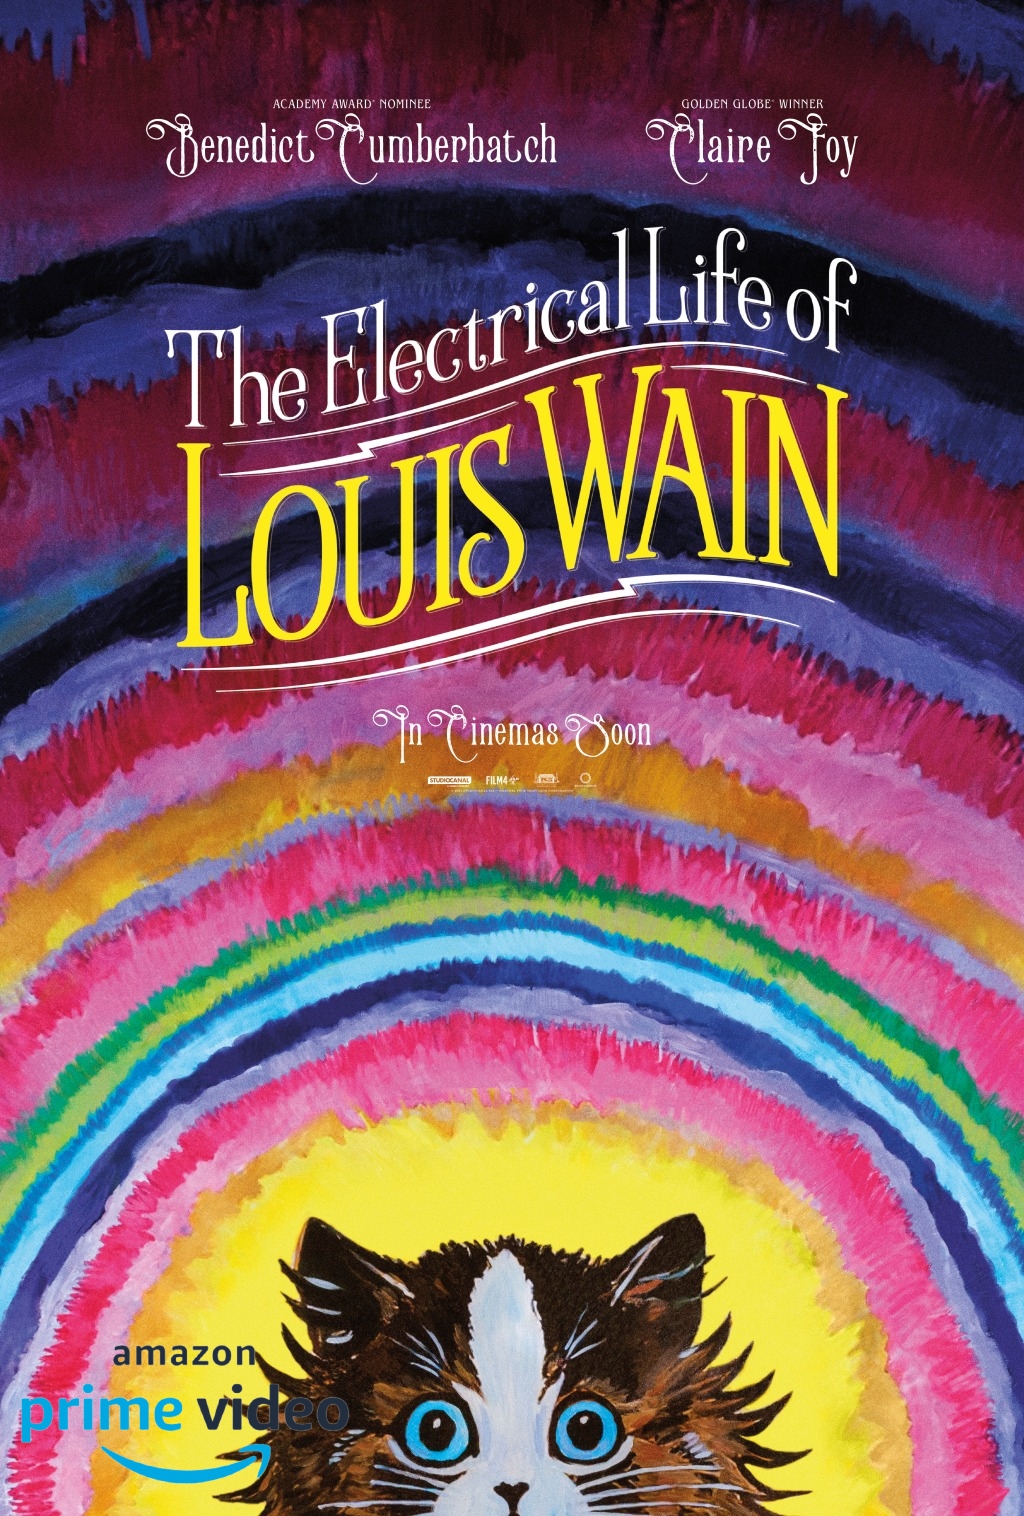 Is The Electrical Life of Louis Wain on Amazon Prime